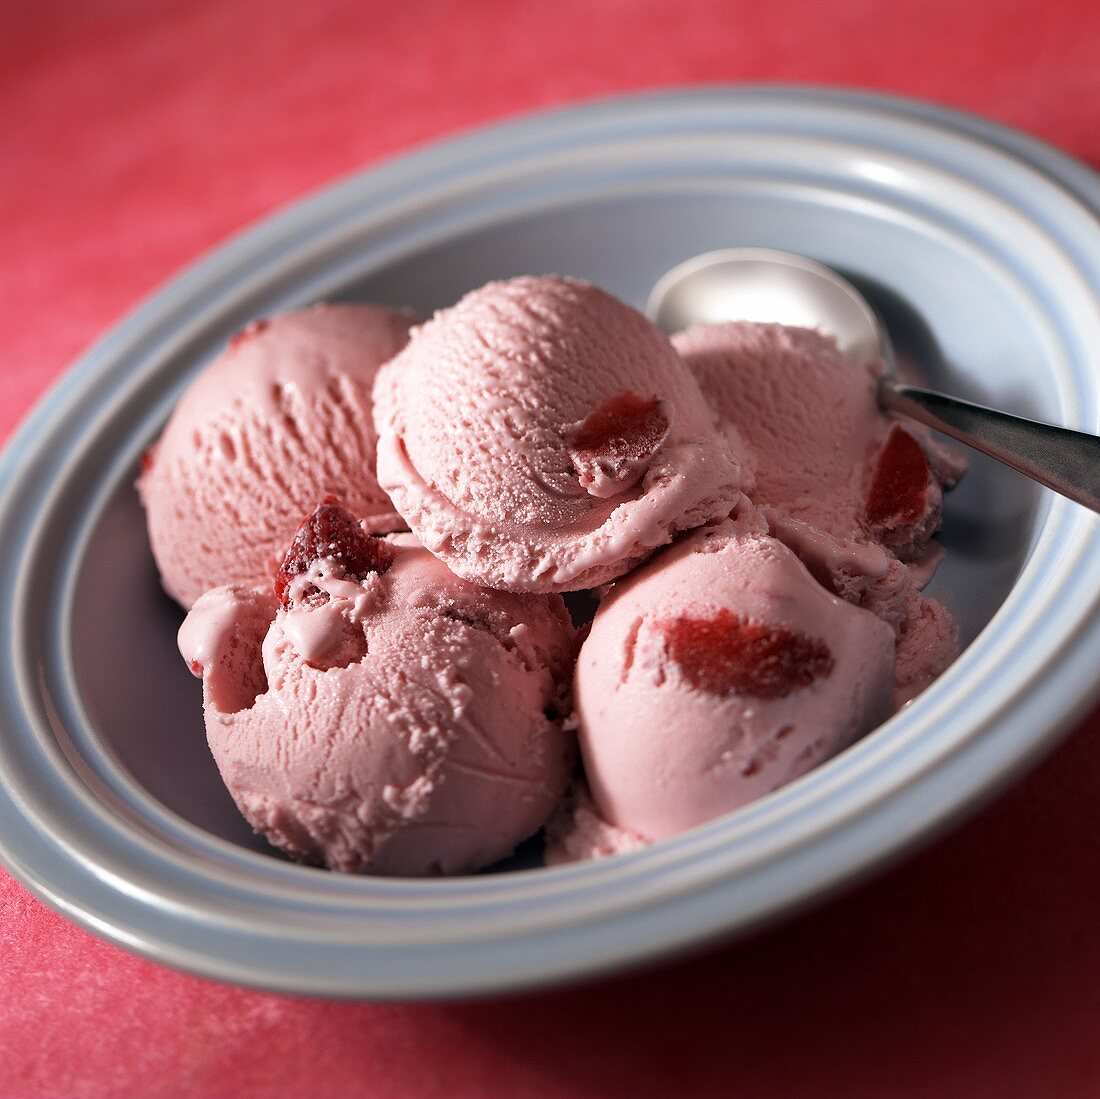 Five scoops of strawberry ice cream in blue bowl